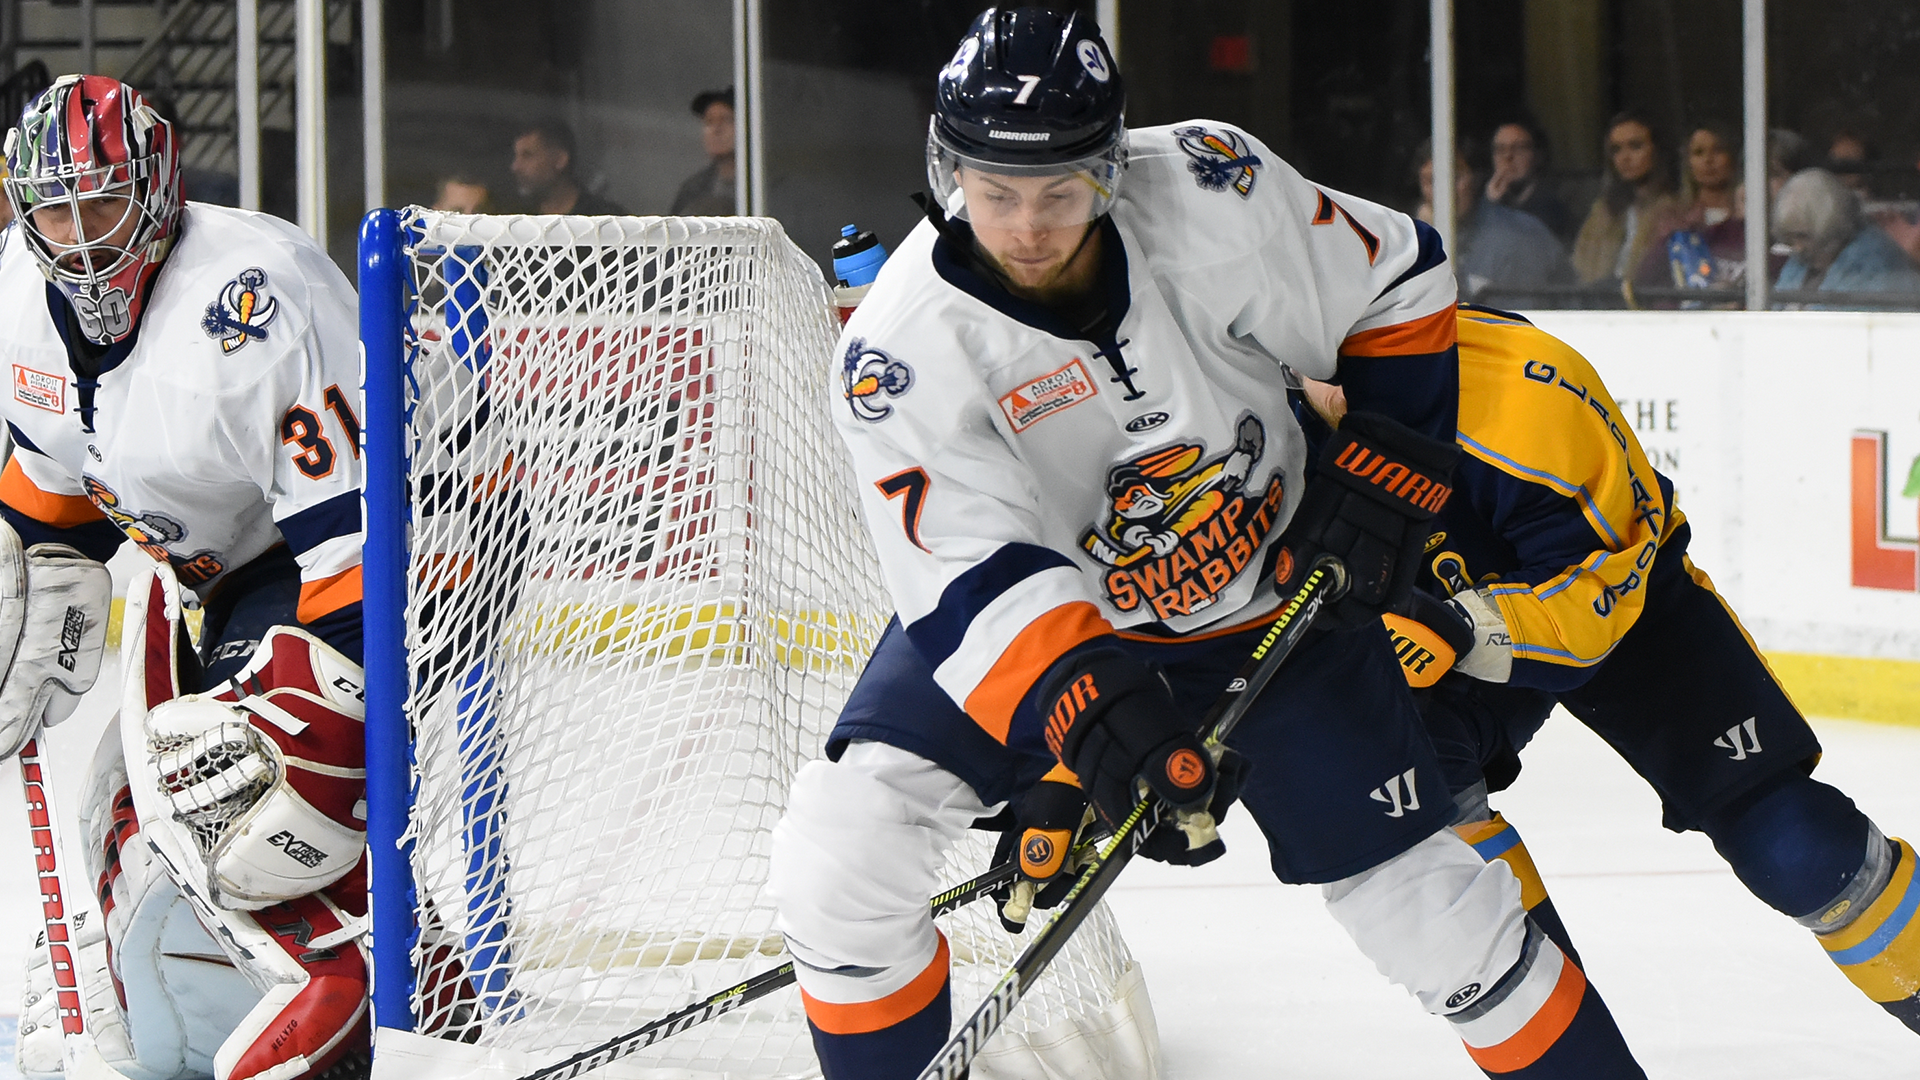 Greenville Swamp Rabbits  GRRROWL PLAYERS TO ATTEND SWAMP RABBITS